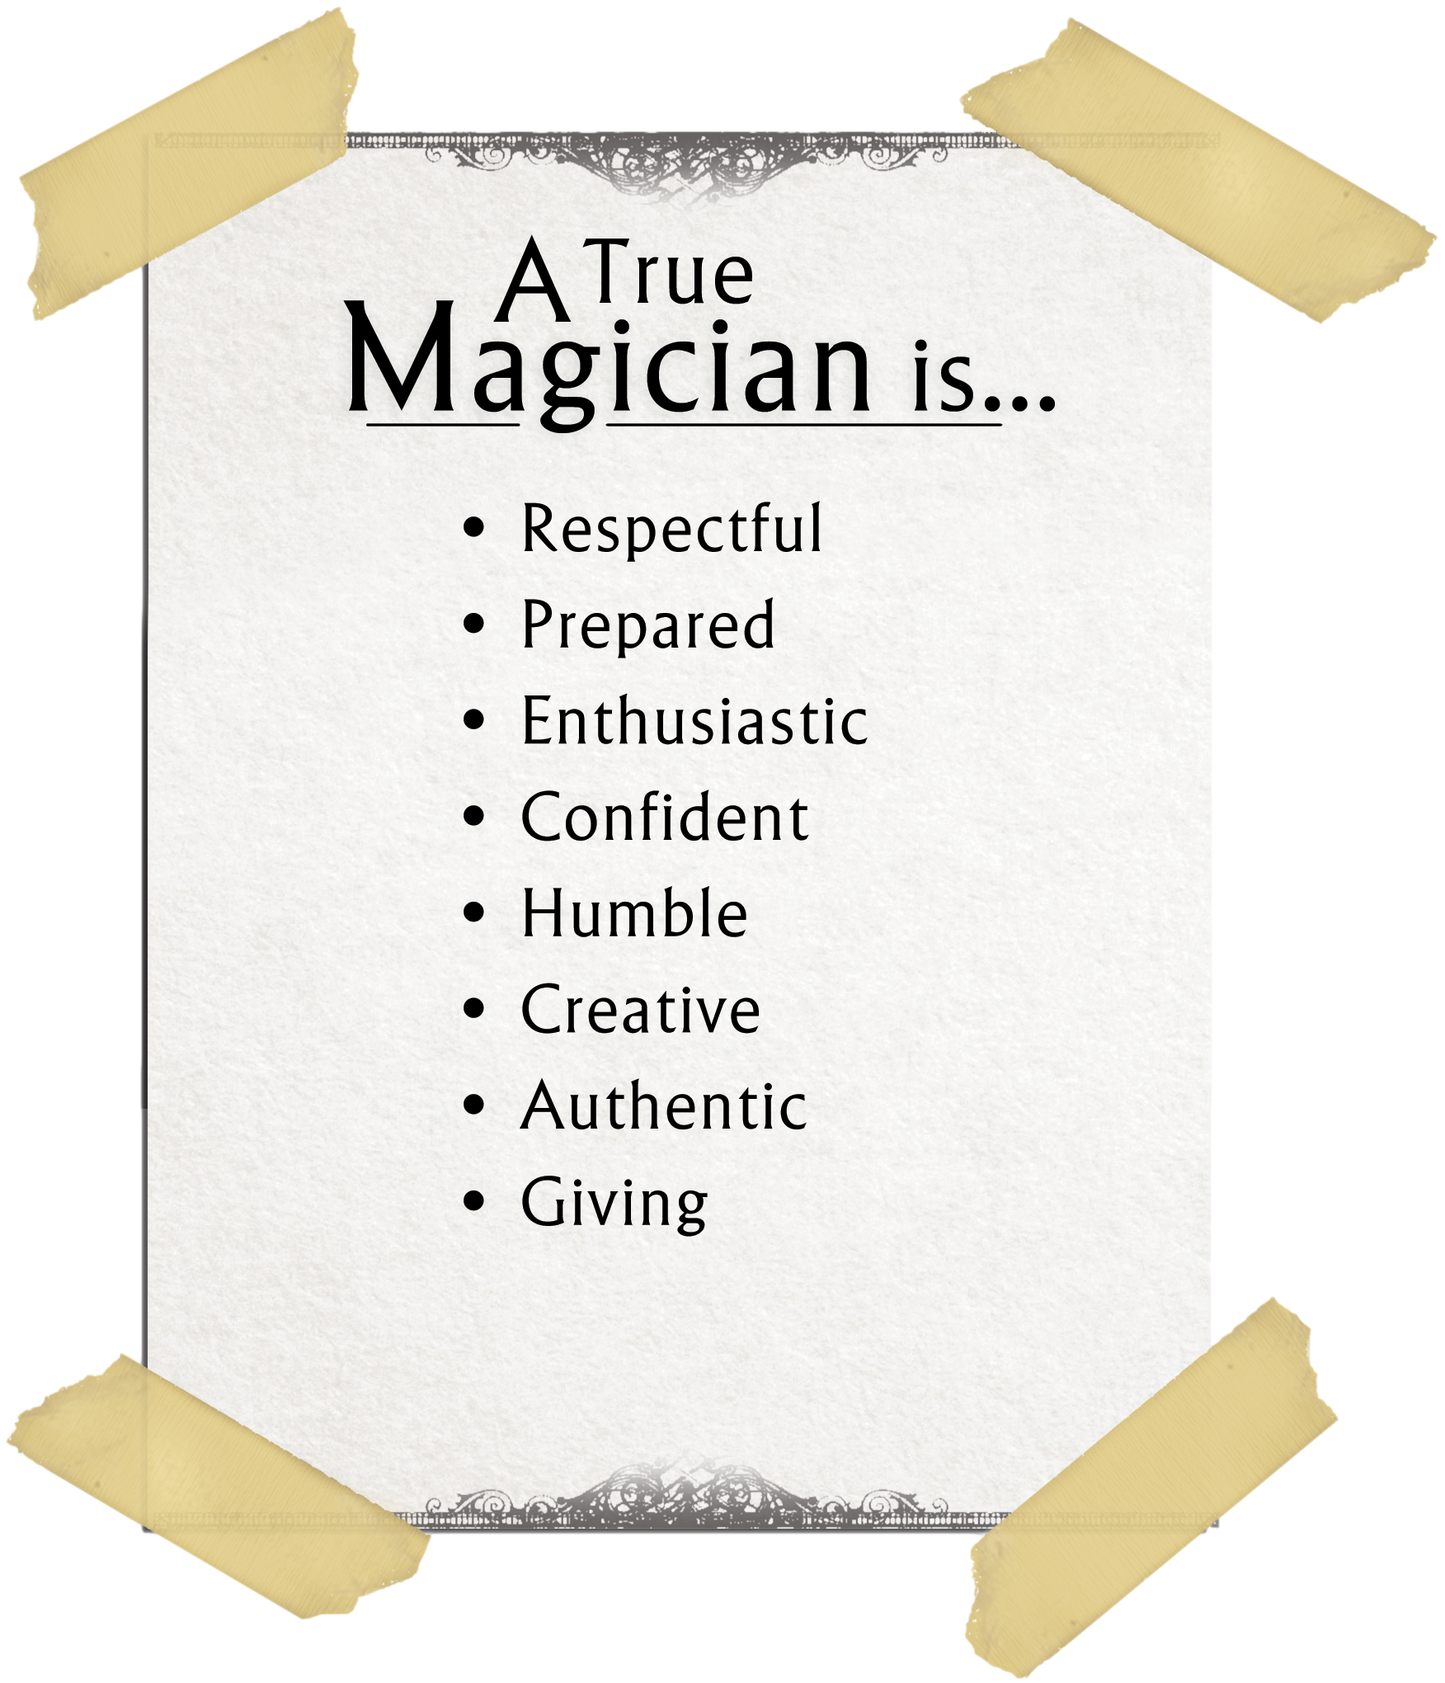 Learn Magic! Ages 7-12 | Offered by Kadabra Magic Academy